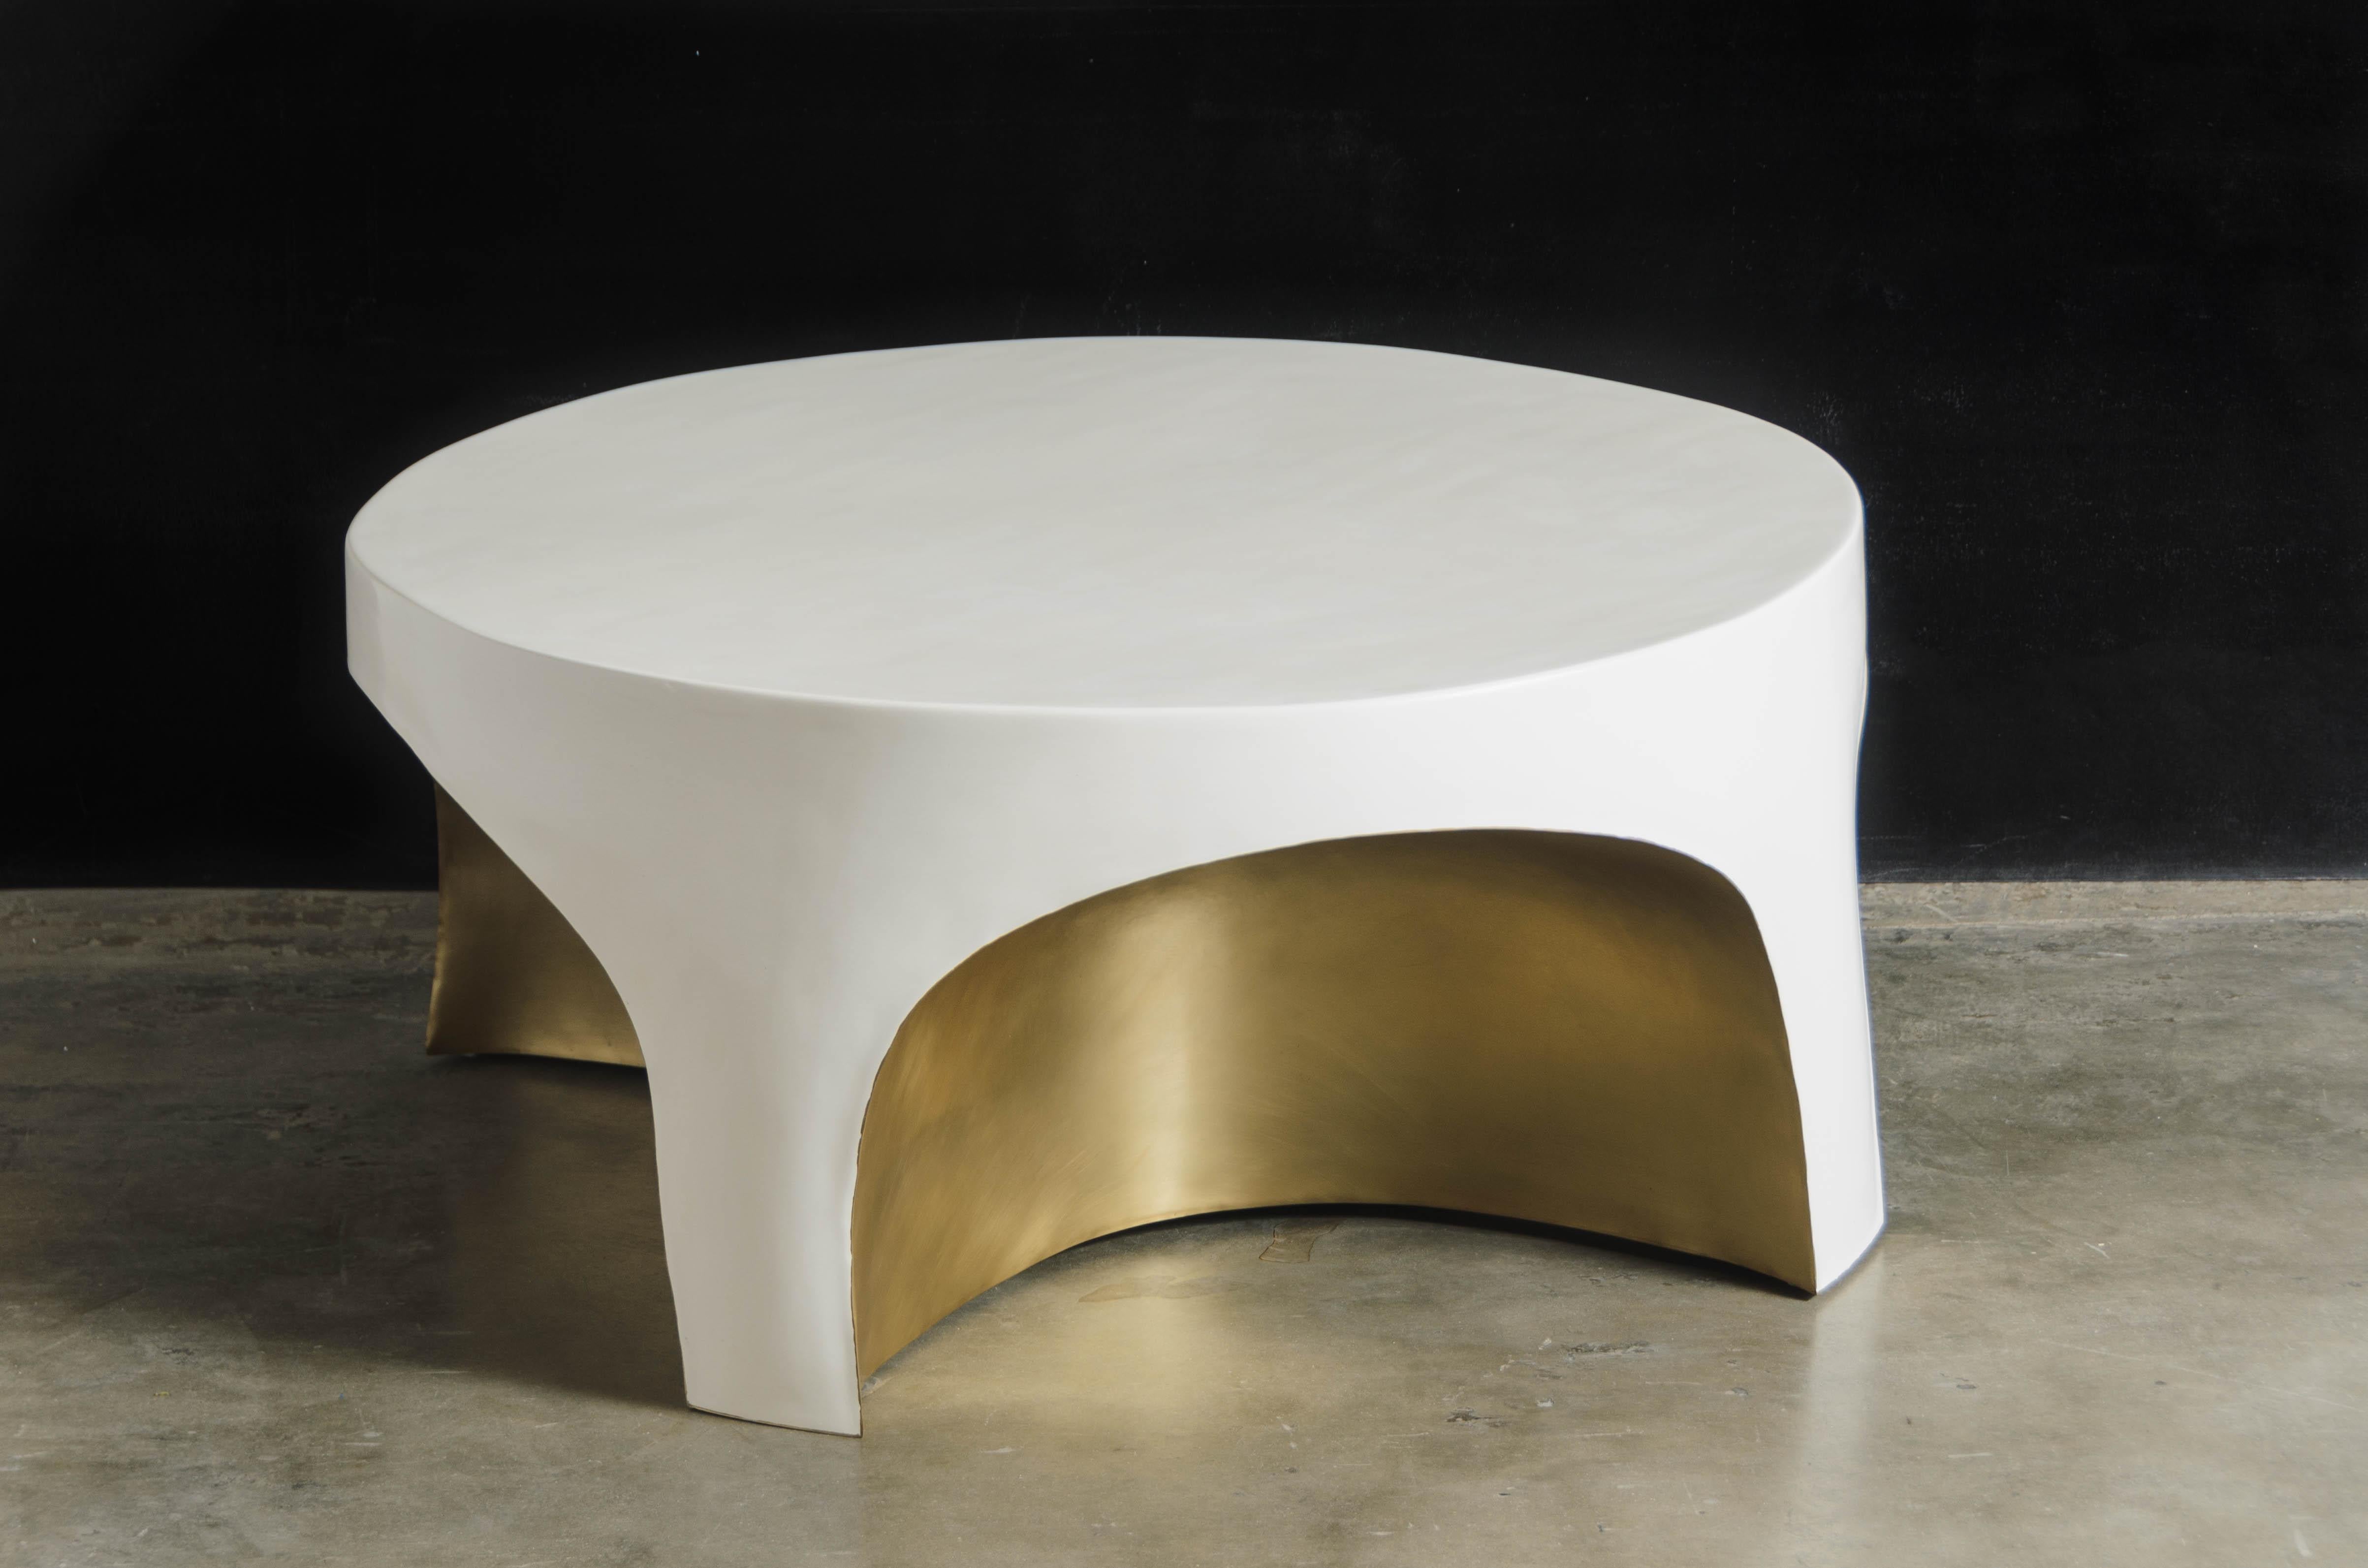 Brass rimmed curve table w/ cream lacquer.
Hand Repoussé
Antiqued Brass
Hand Made Lacquer
Contemporary 
Limited Edition

Repoussé is the traditional art of hand-hammering decorative relief onto. sheet metal. This technique involves using a